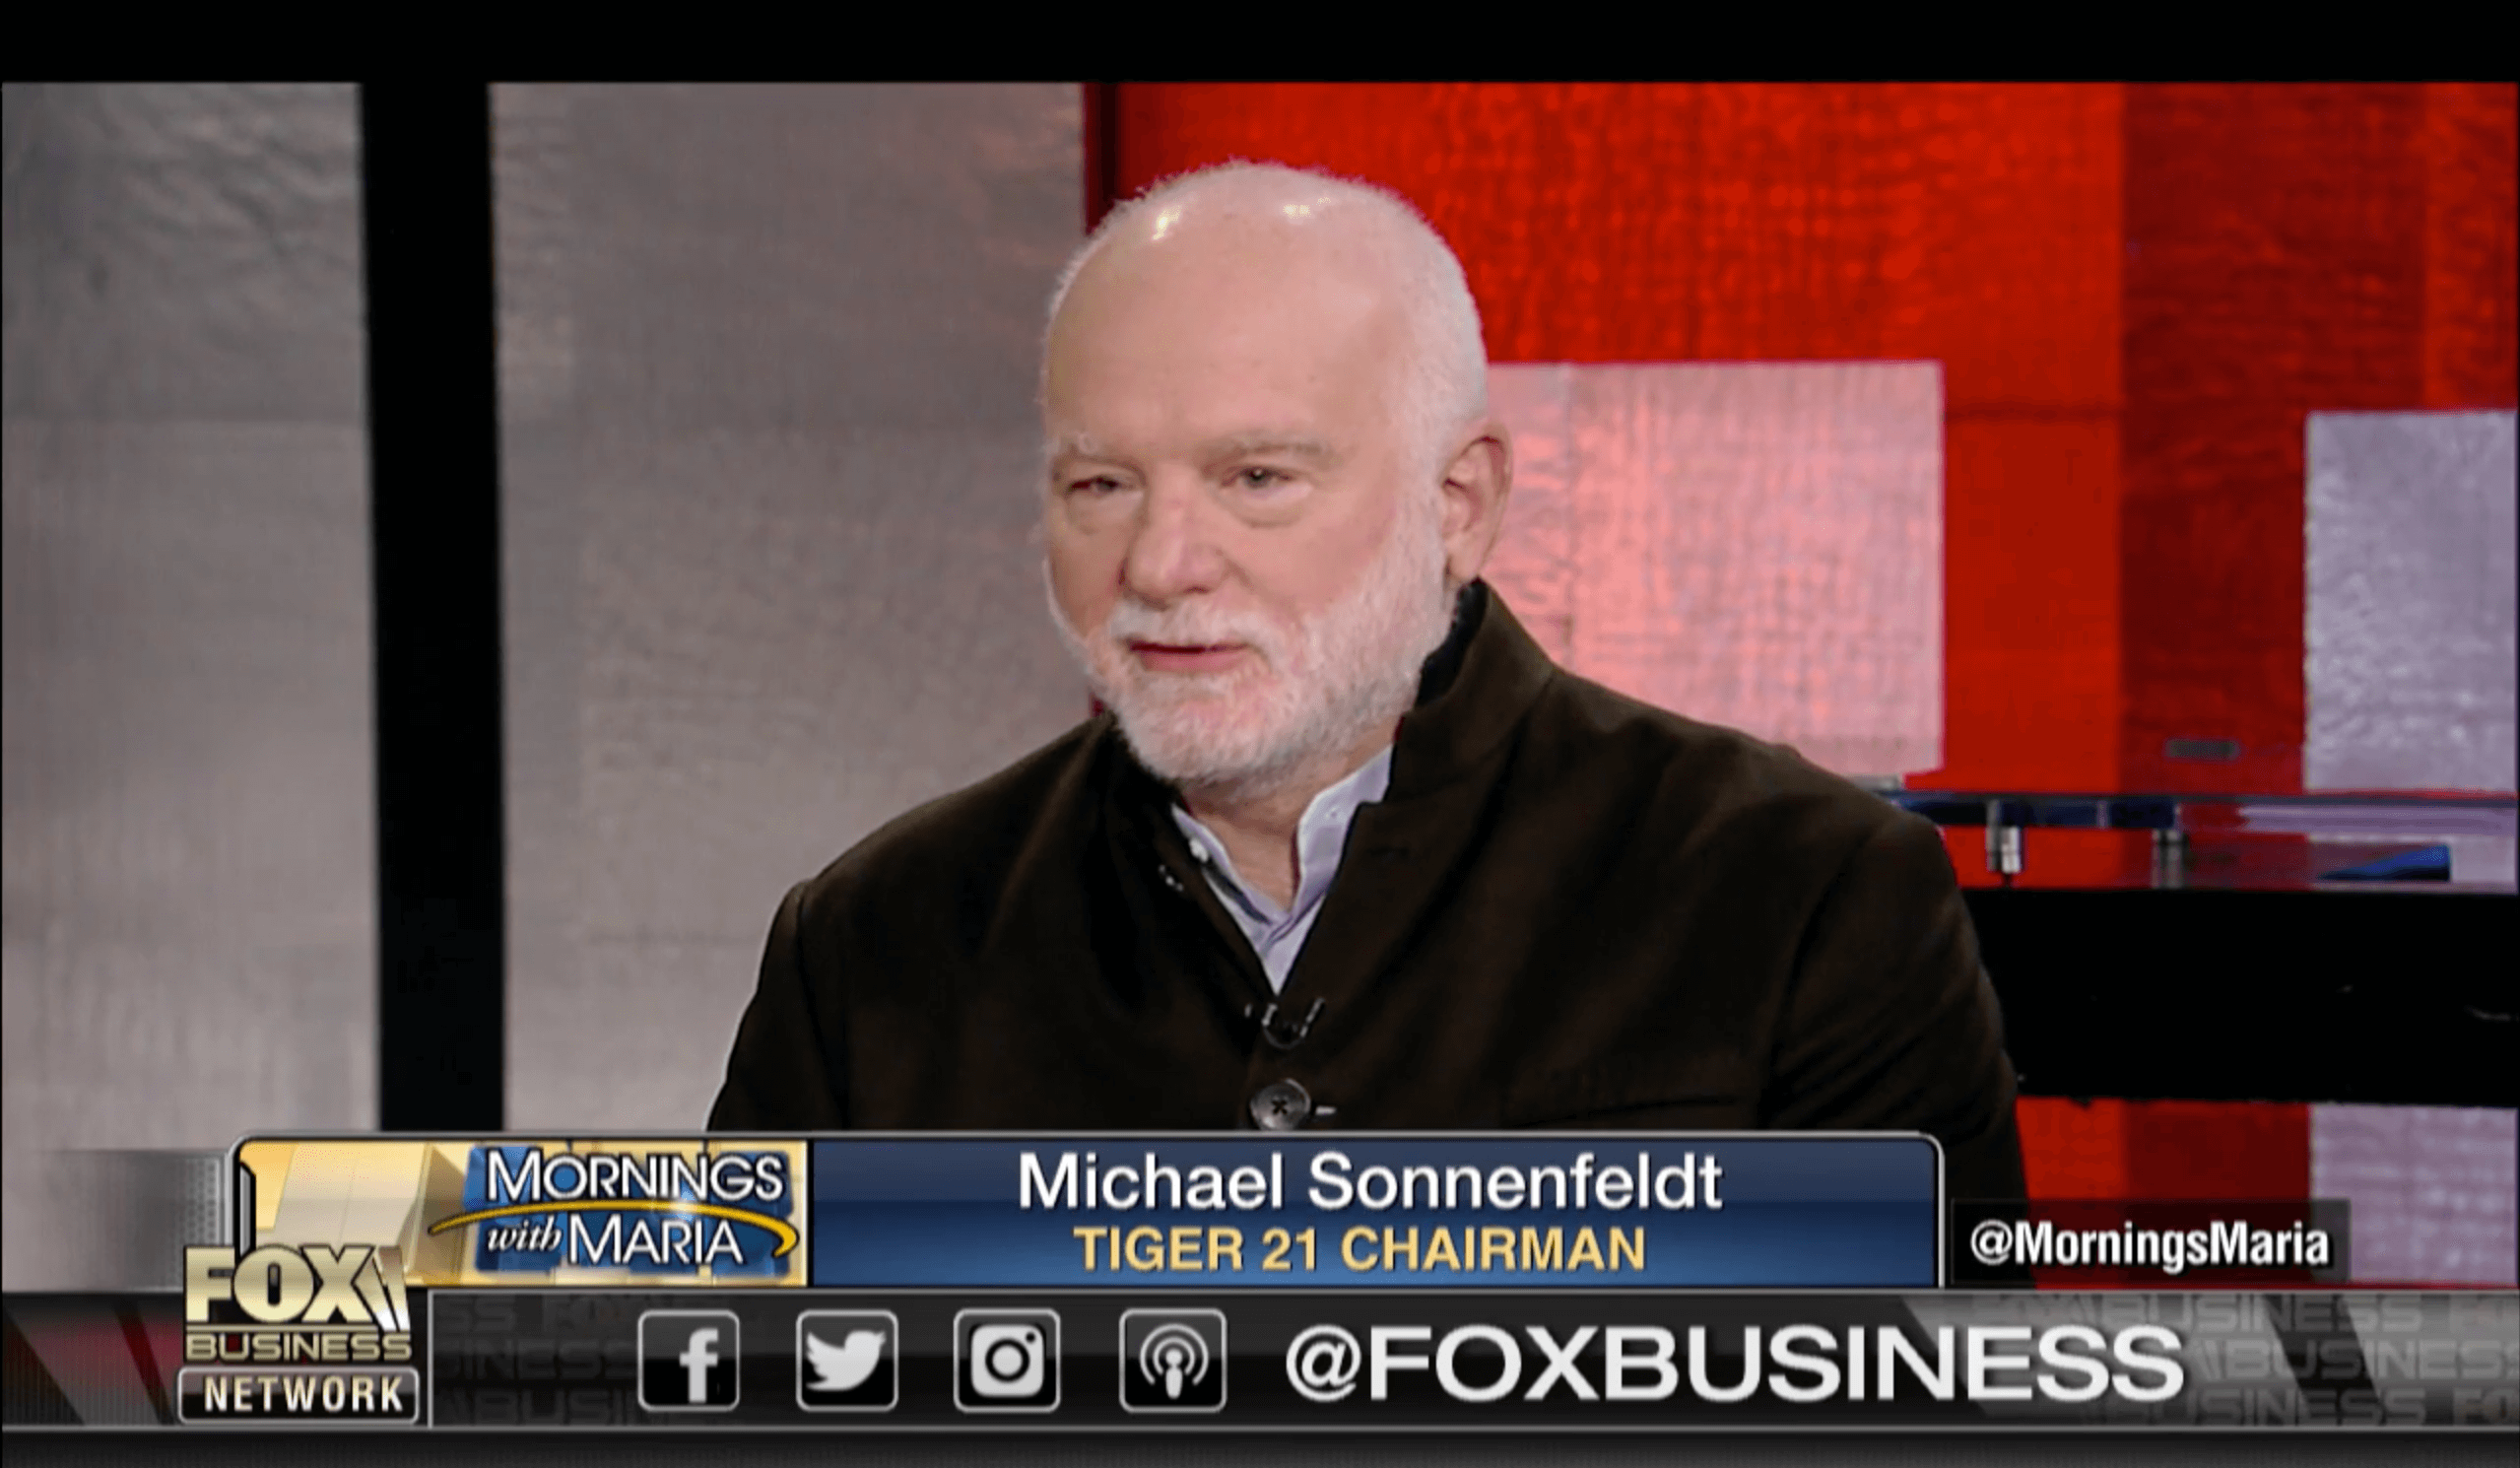 PART TWO: TIGER 21 FOUNDER ADDRESSES ON FOX BUSINESS THE IMPACT OF FEDERAL RESERVE POLICY